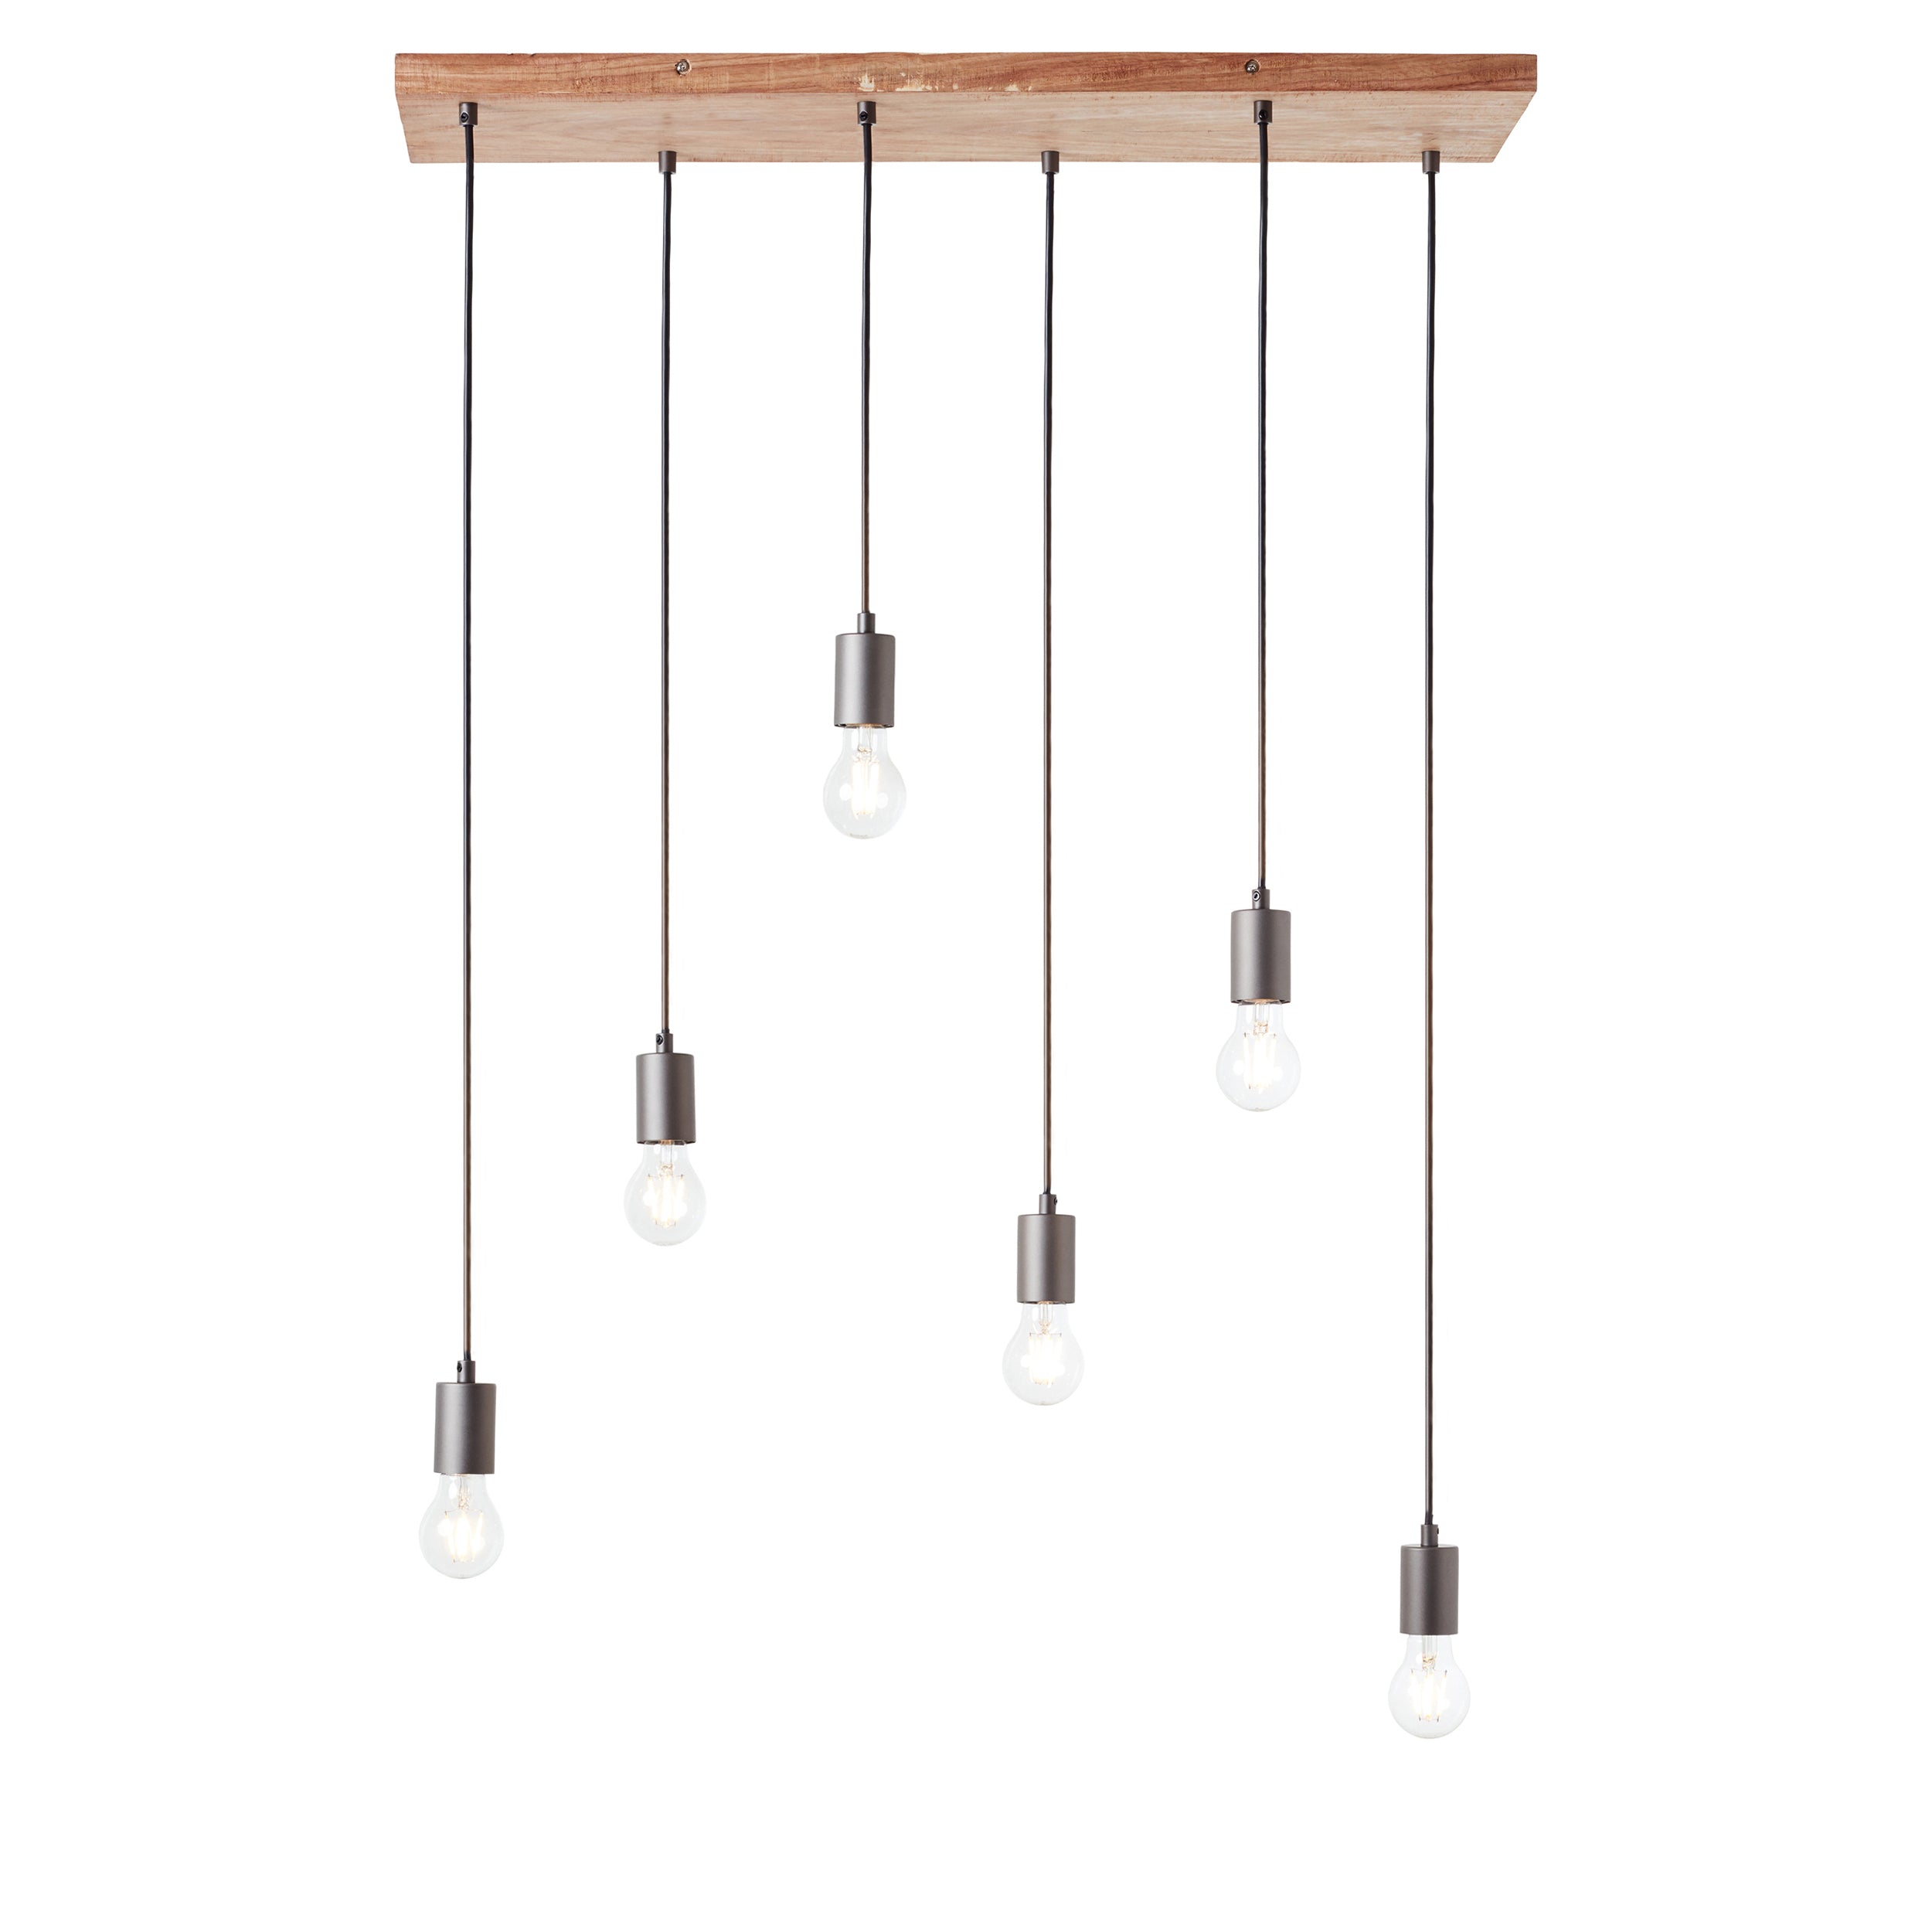 Stellan 6 Light Pendant. Oak Stained Plywood & Anthracite Finish